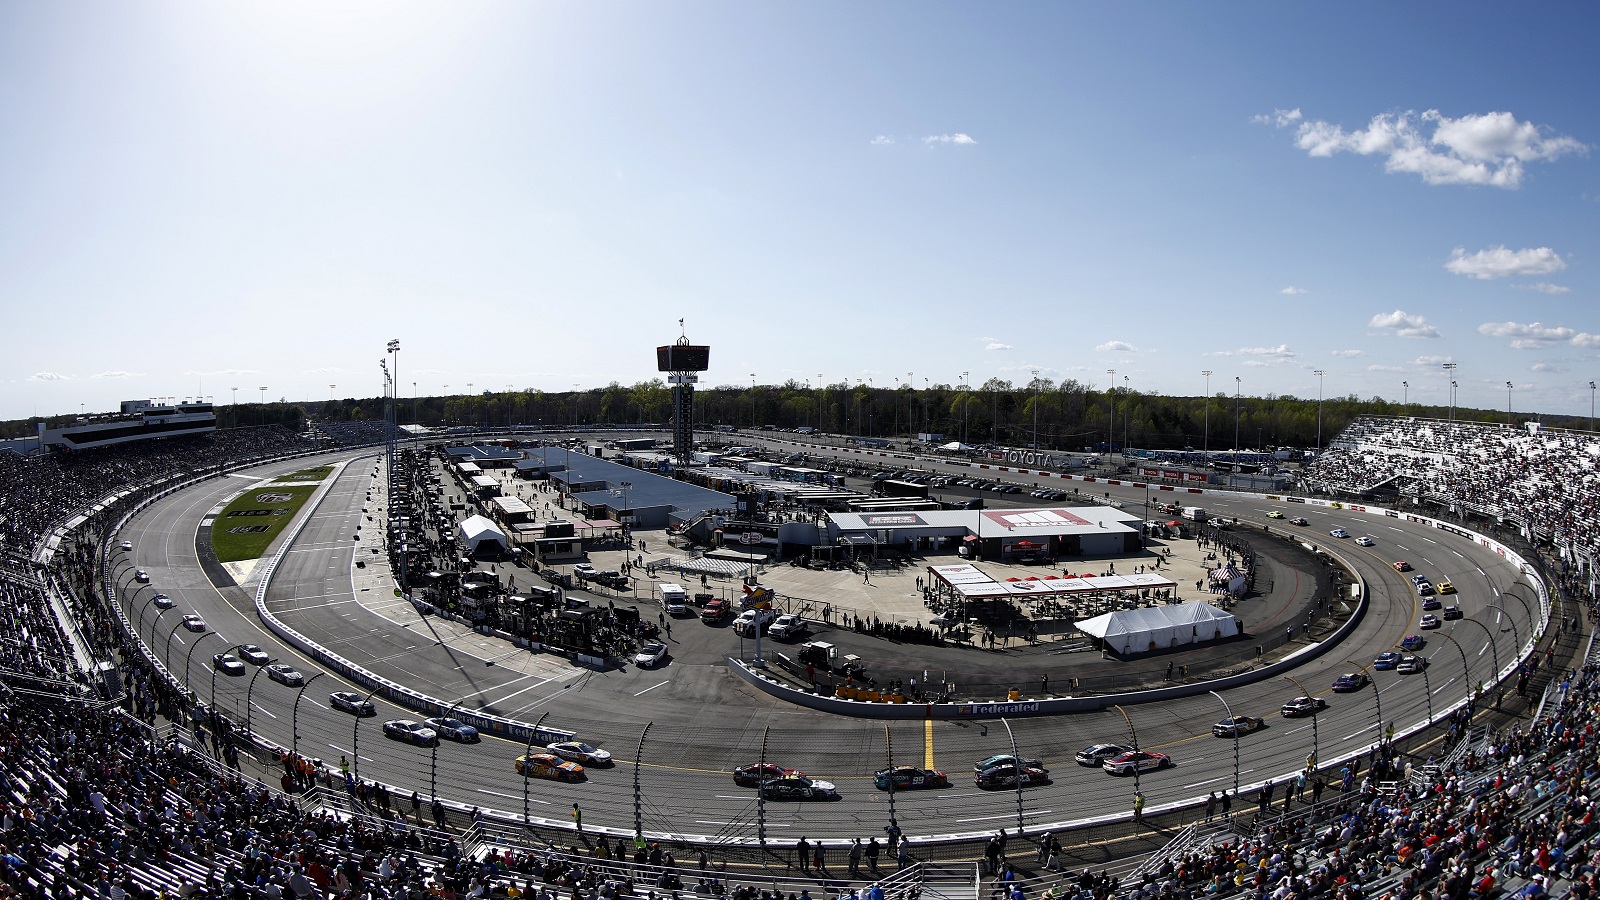 A general view of racing during the NASCAR Cup Series Toyota Owners 400 at Richmond Raceway on April 3, 2022, in Richmond, Virginia.